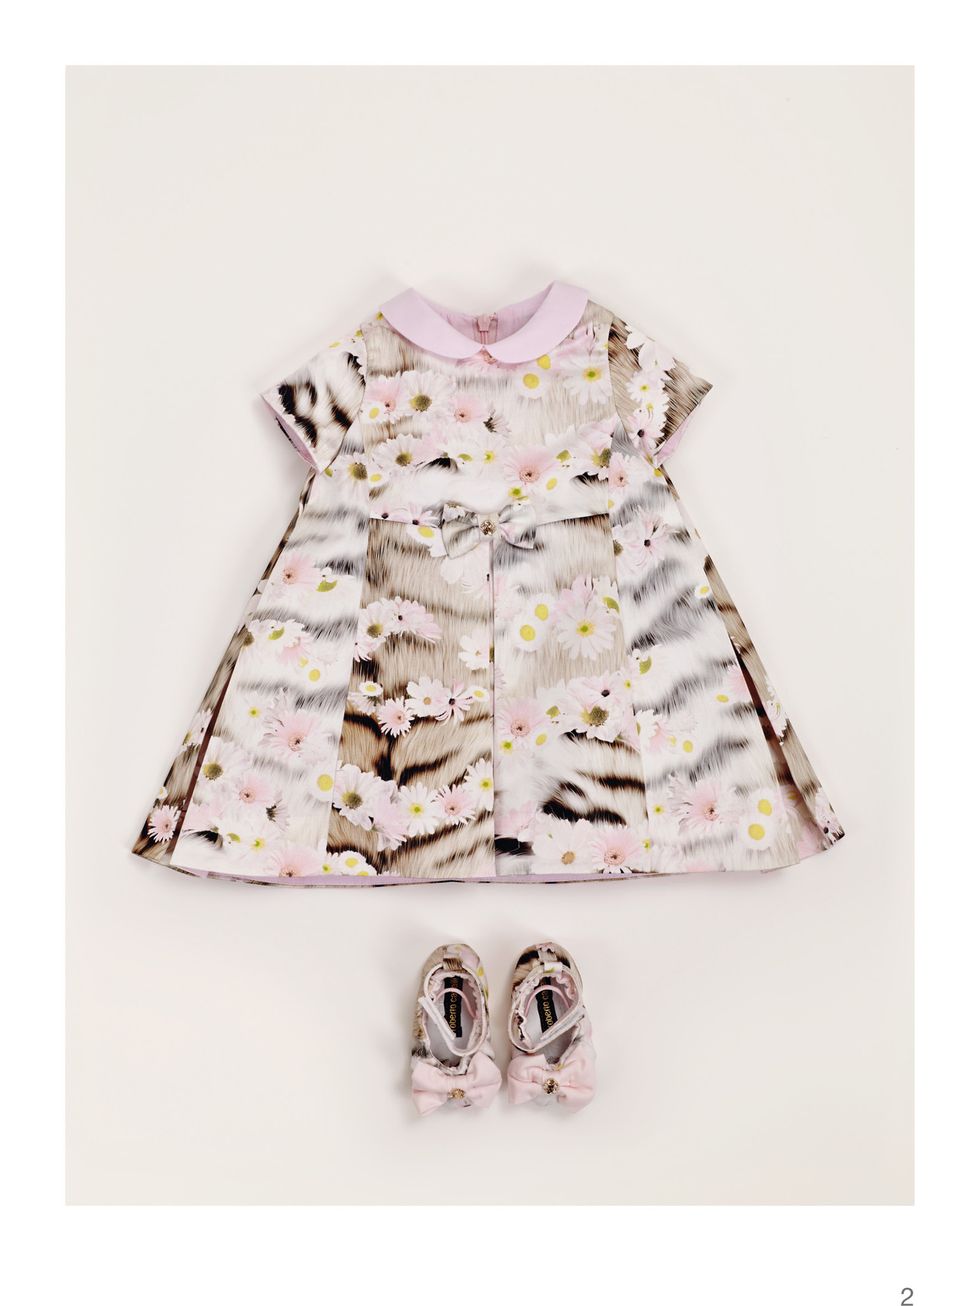 Product, Collar, Sleeve, Dress shirt, White, Pink, Pattern, Baby & toddler clothing, Jewellery, Lavender, 